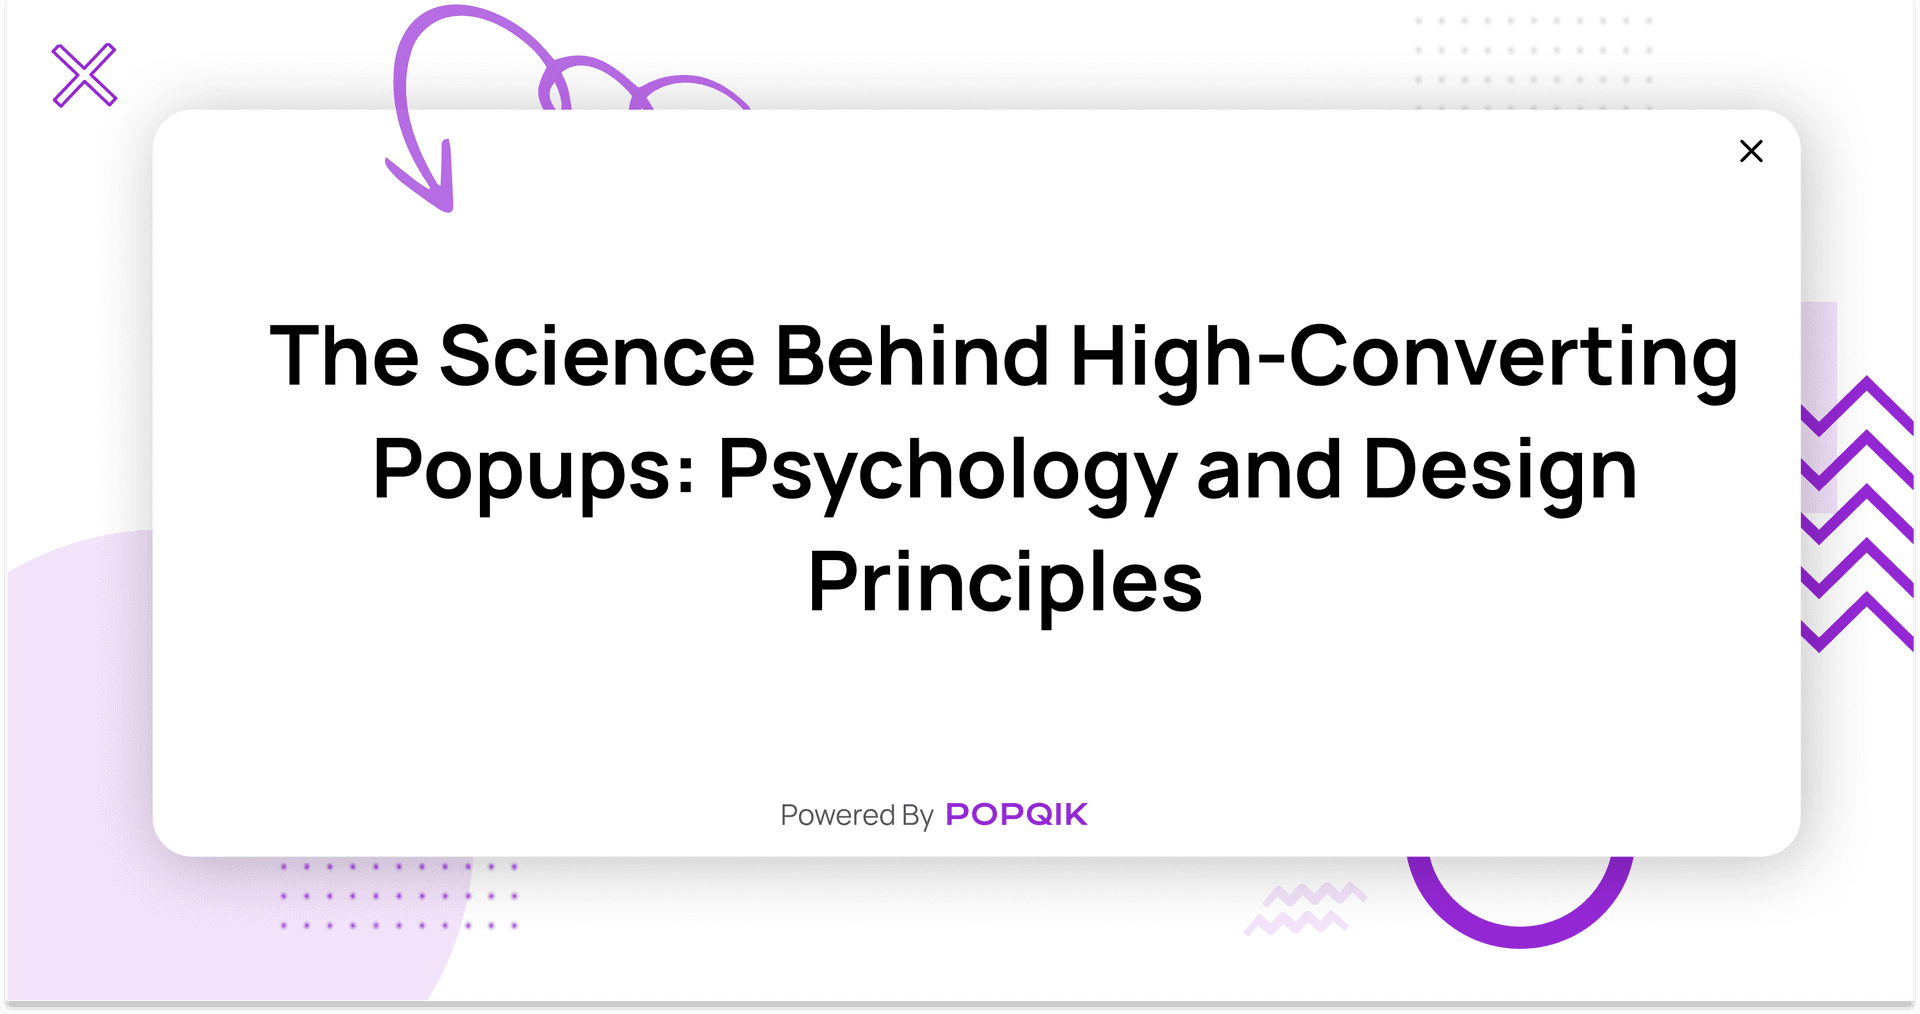 The Science Behind High-Converting Popups: Psychology and Design Principles